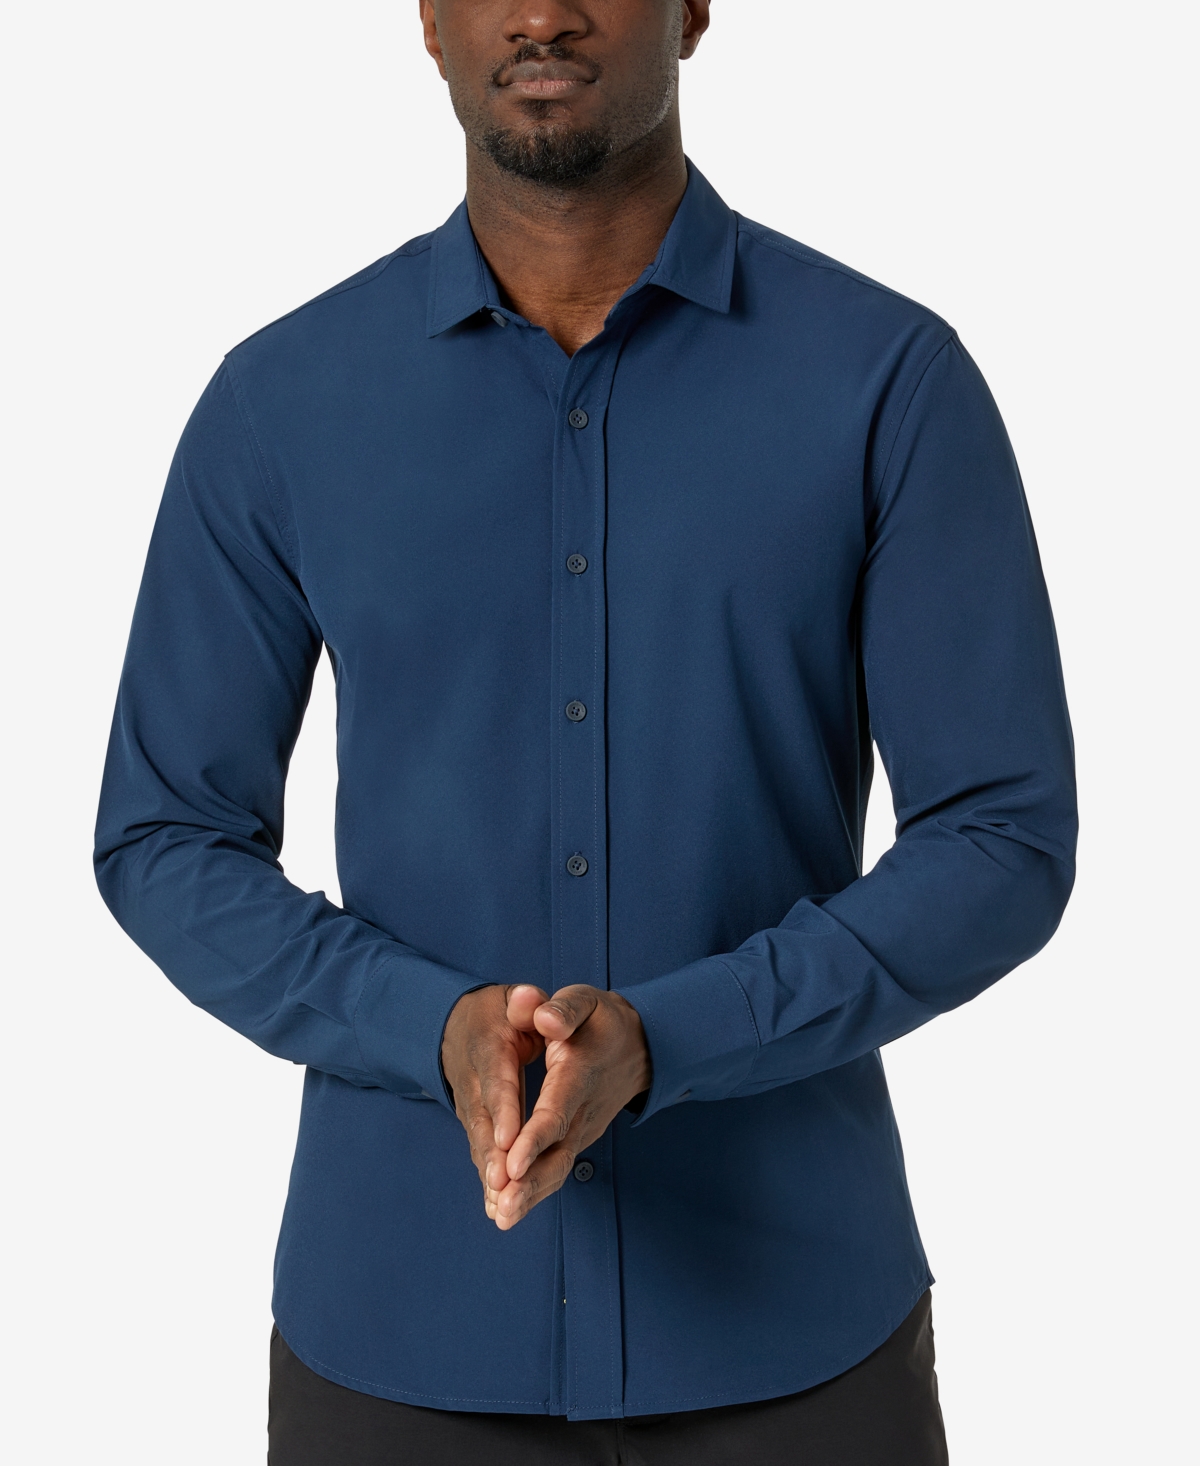 Kenneth Cole Men's Solid Performance Stretch Shirt